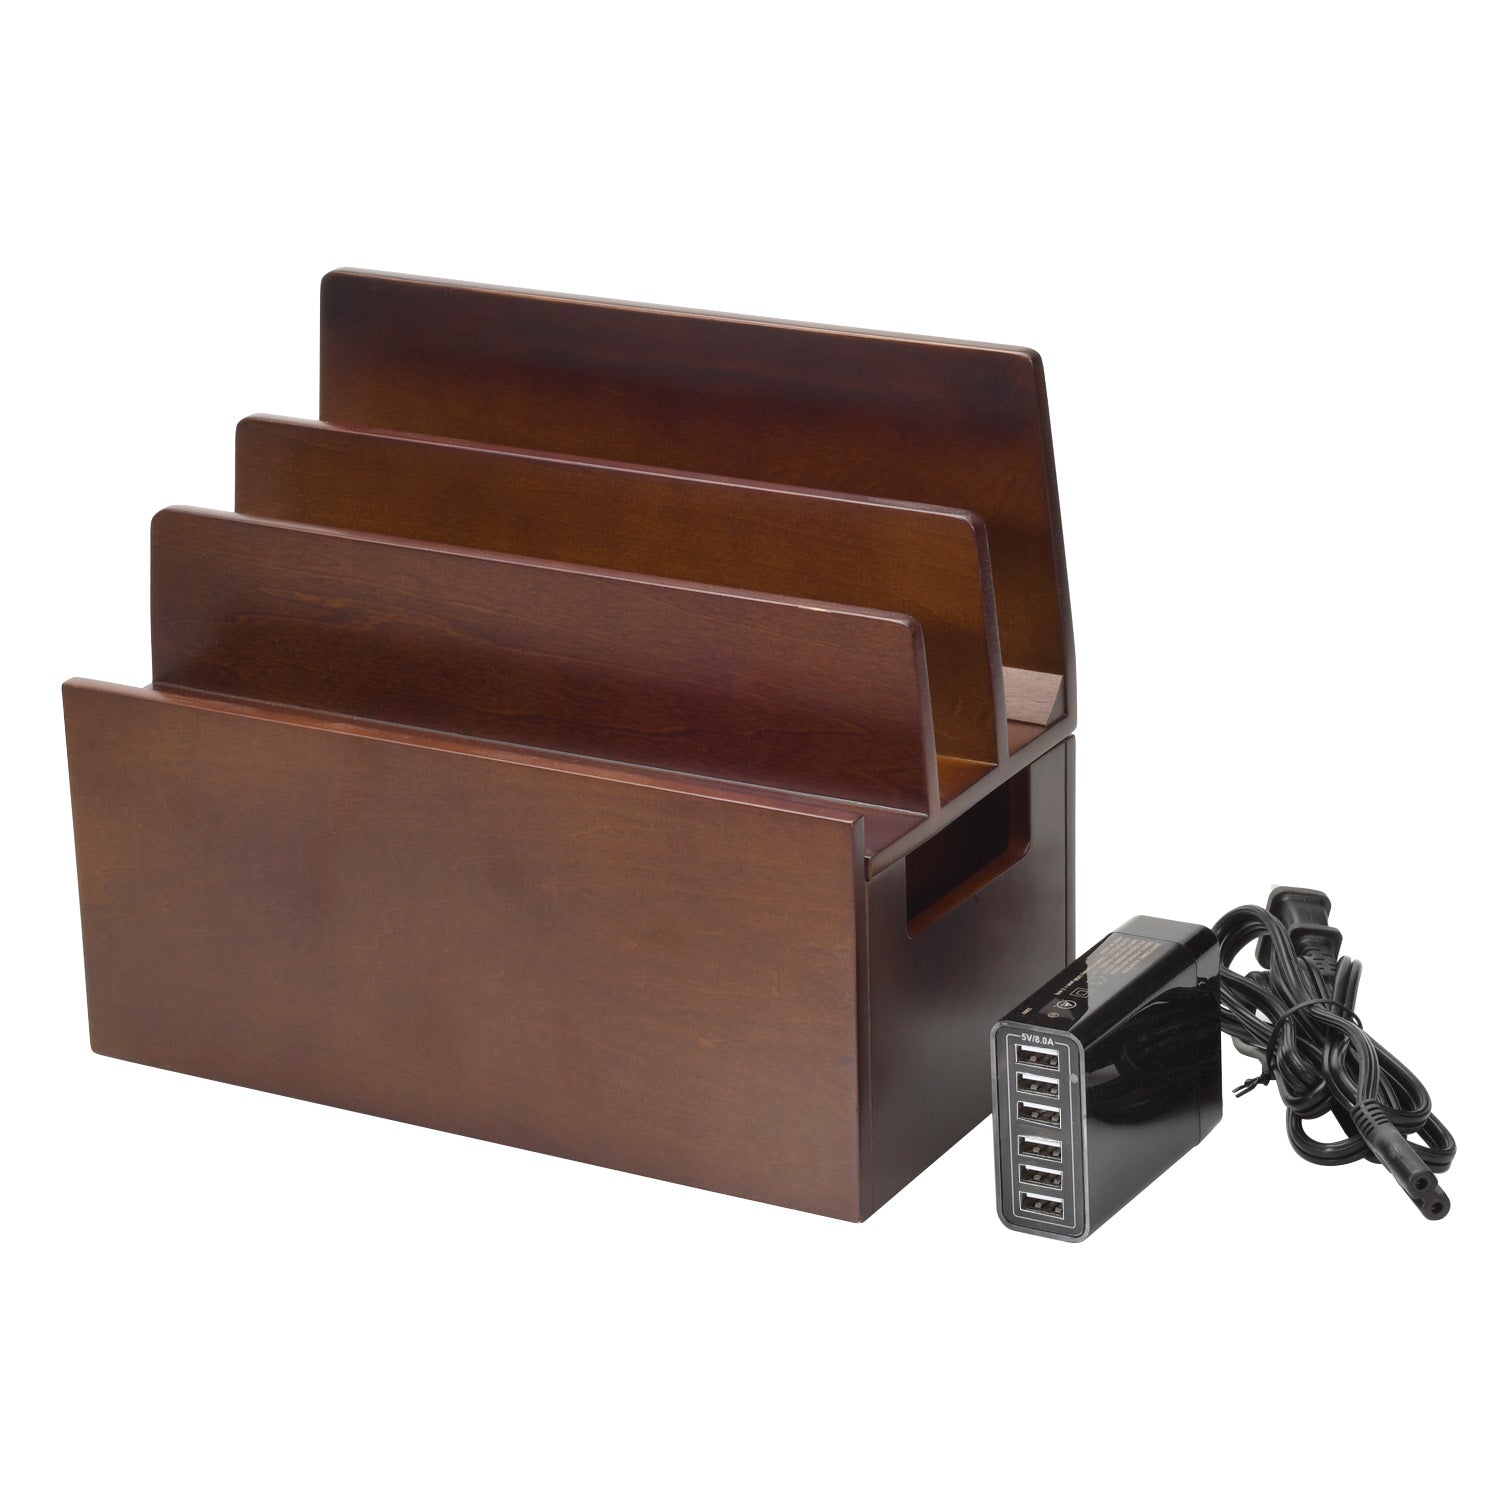 Classic Wood Charging Station & Powermod 5 USB Charger Combo